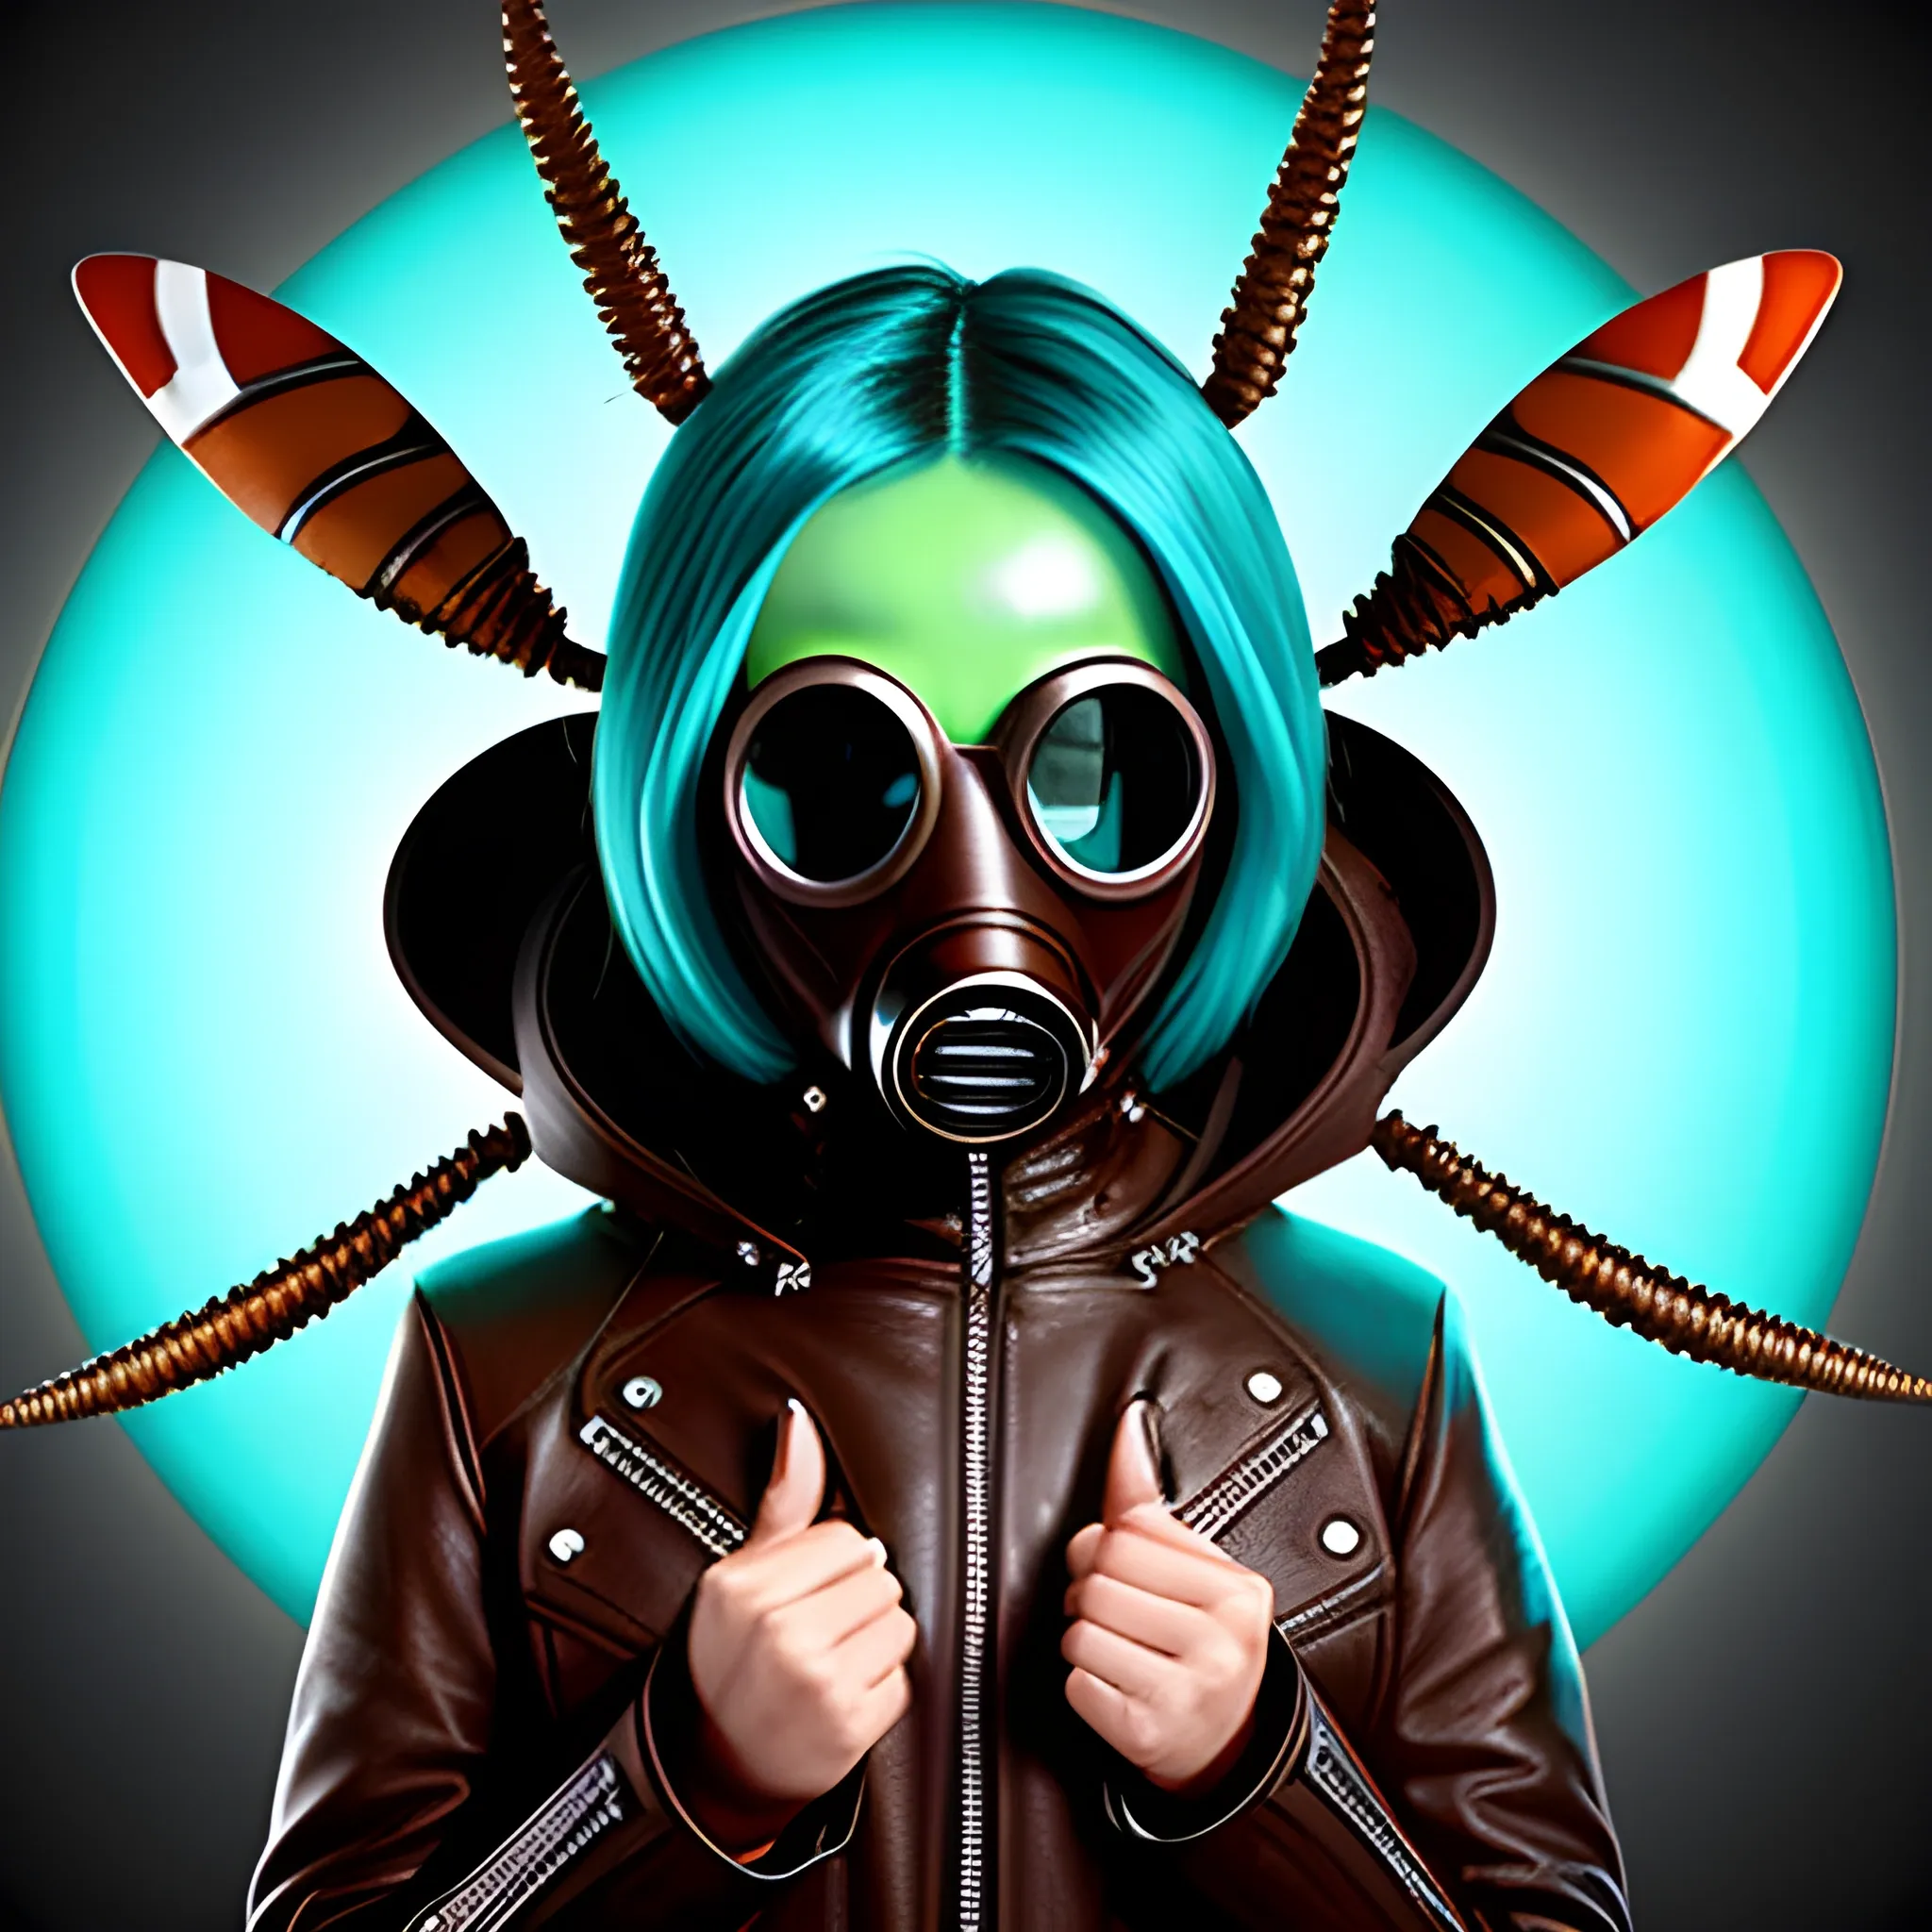 alien woman with insect antenna and turquoise hair, wearing brown leather jacket with hood, and wearing a gas mask